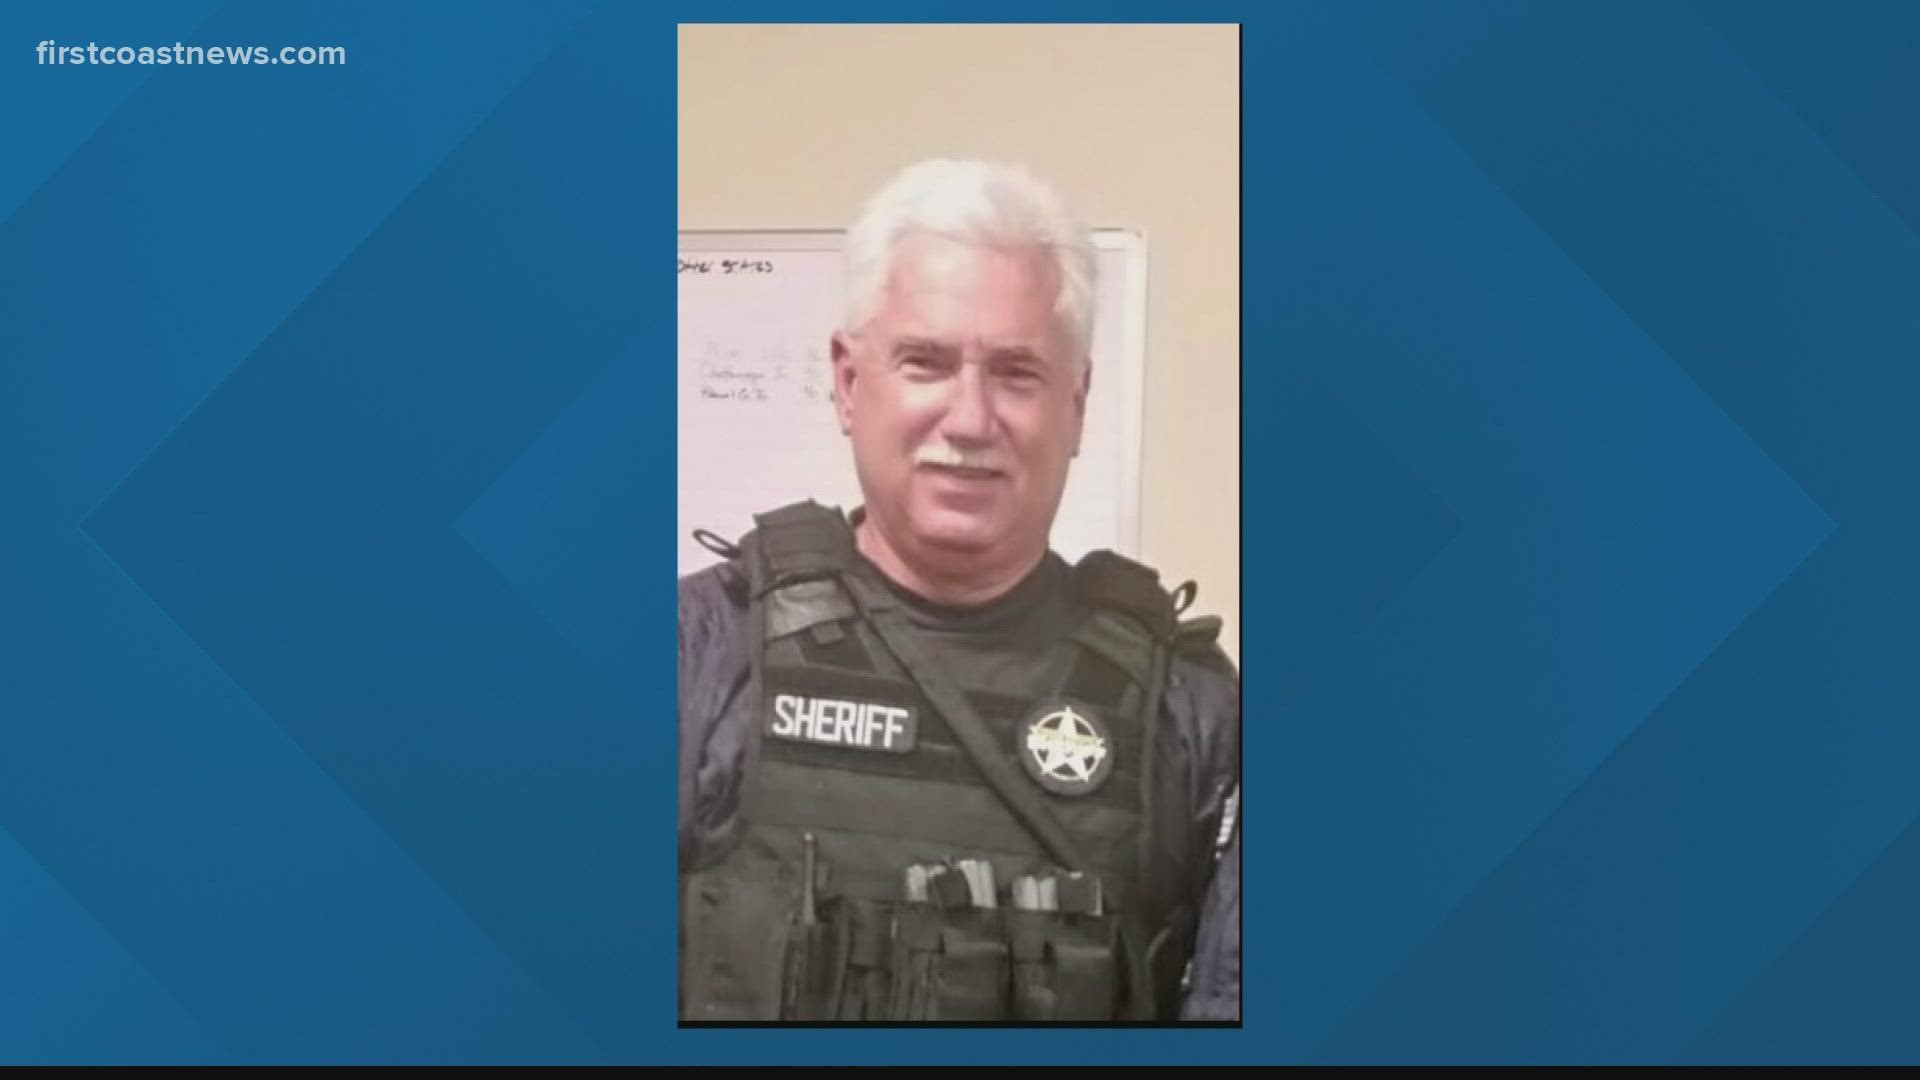 Leon Tucker had been in law enforcement for 30 years, including 11 years with the Glynn County Sheriff's Office.